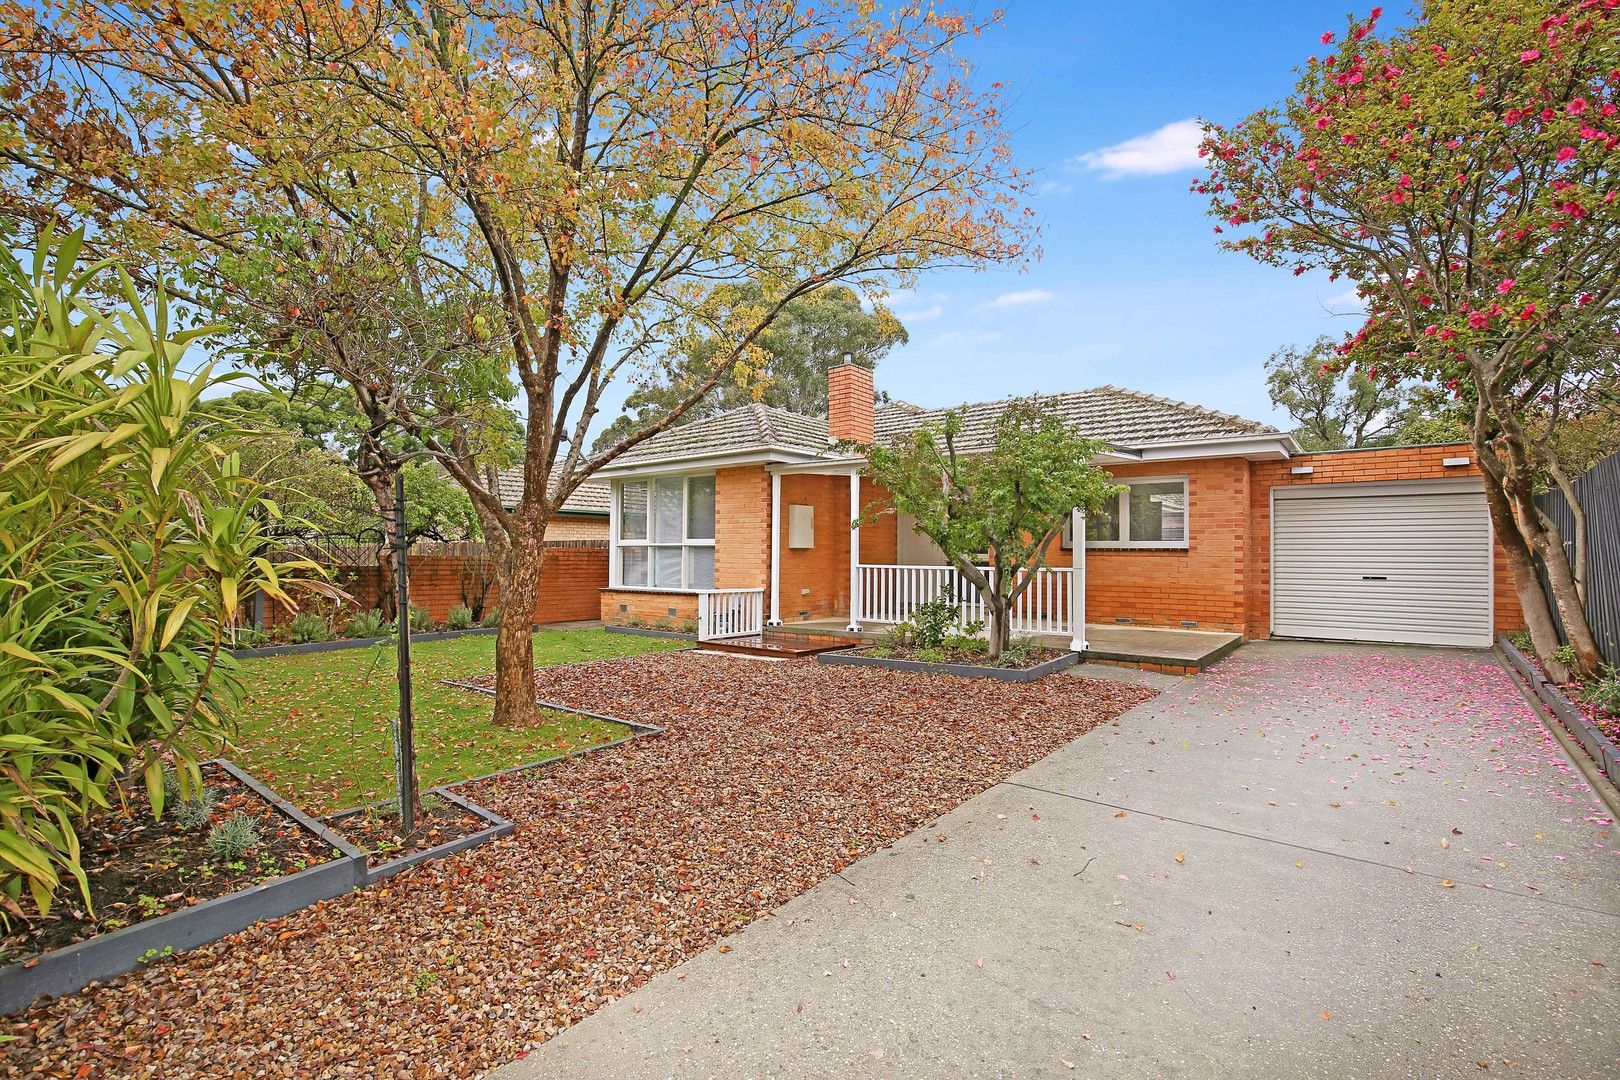 3 bedrooms House in 4A Dickson Crescent RINGWOOD NORTH VIC, 3134